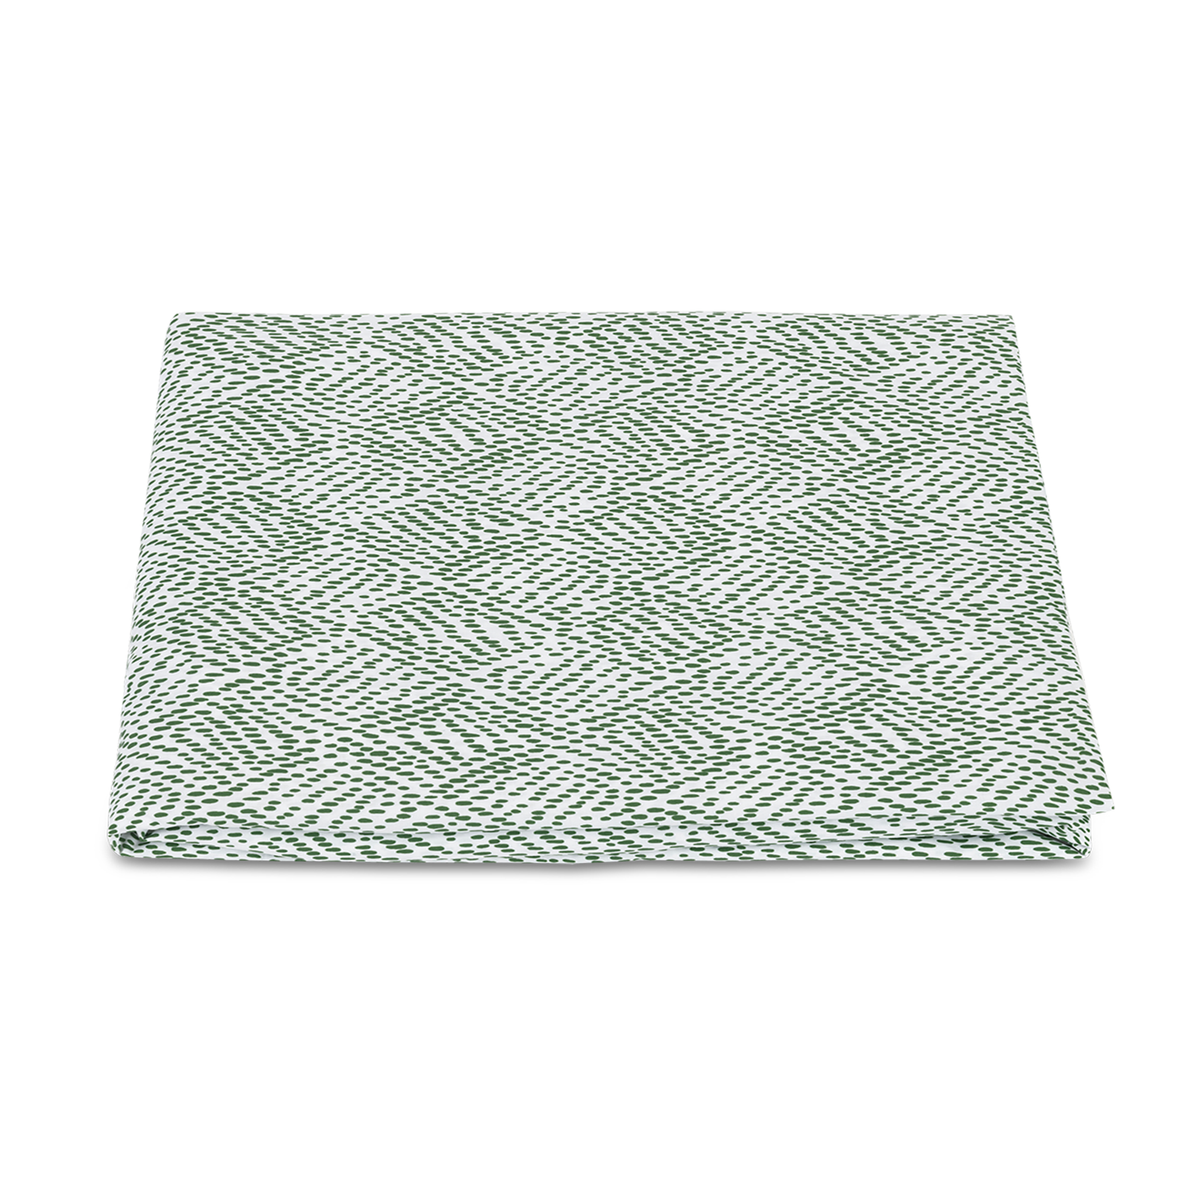 Folded Fitted Sheet of Matouk Duma Diamond Bedding in Grass Color